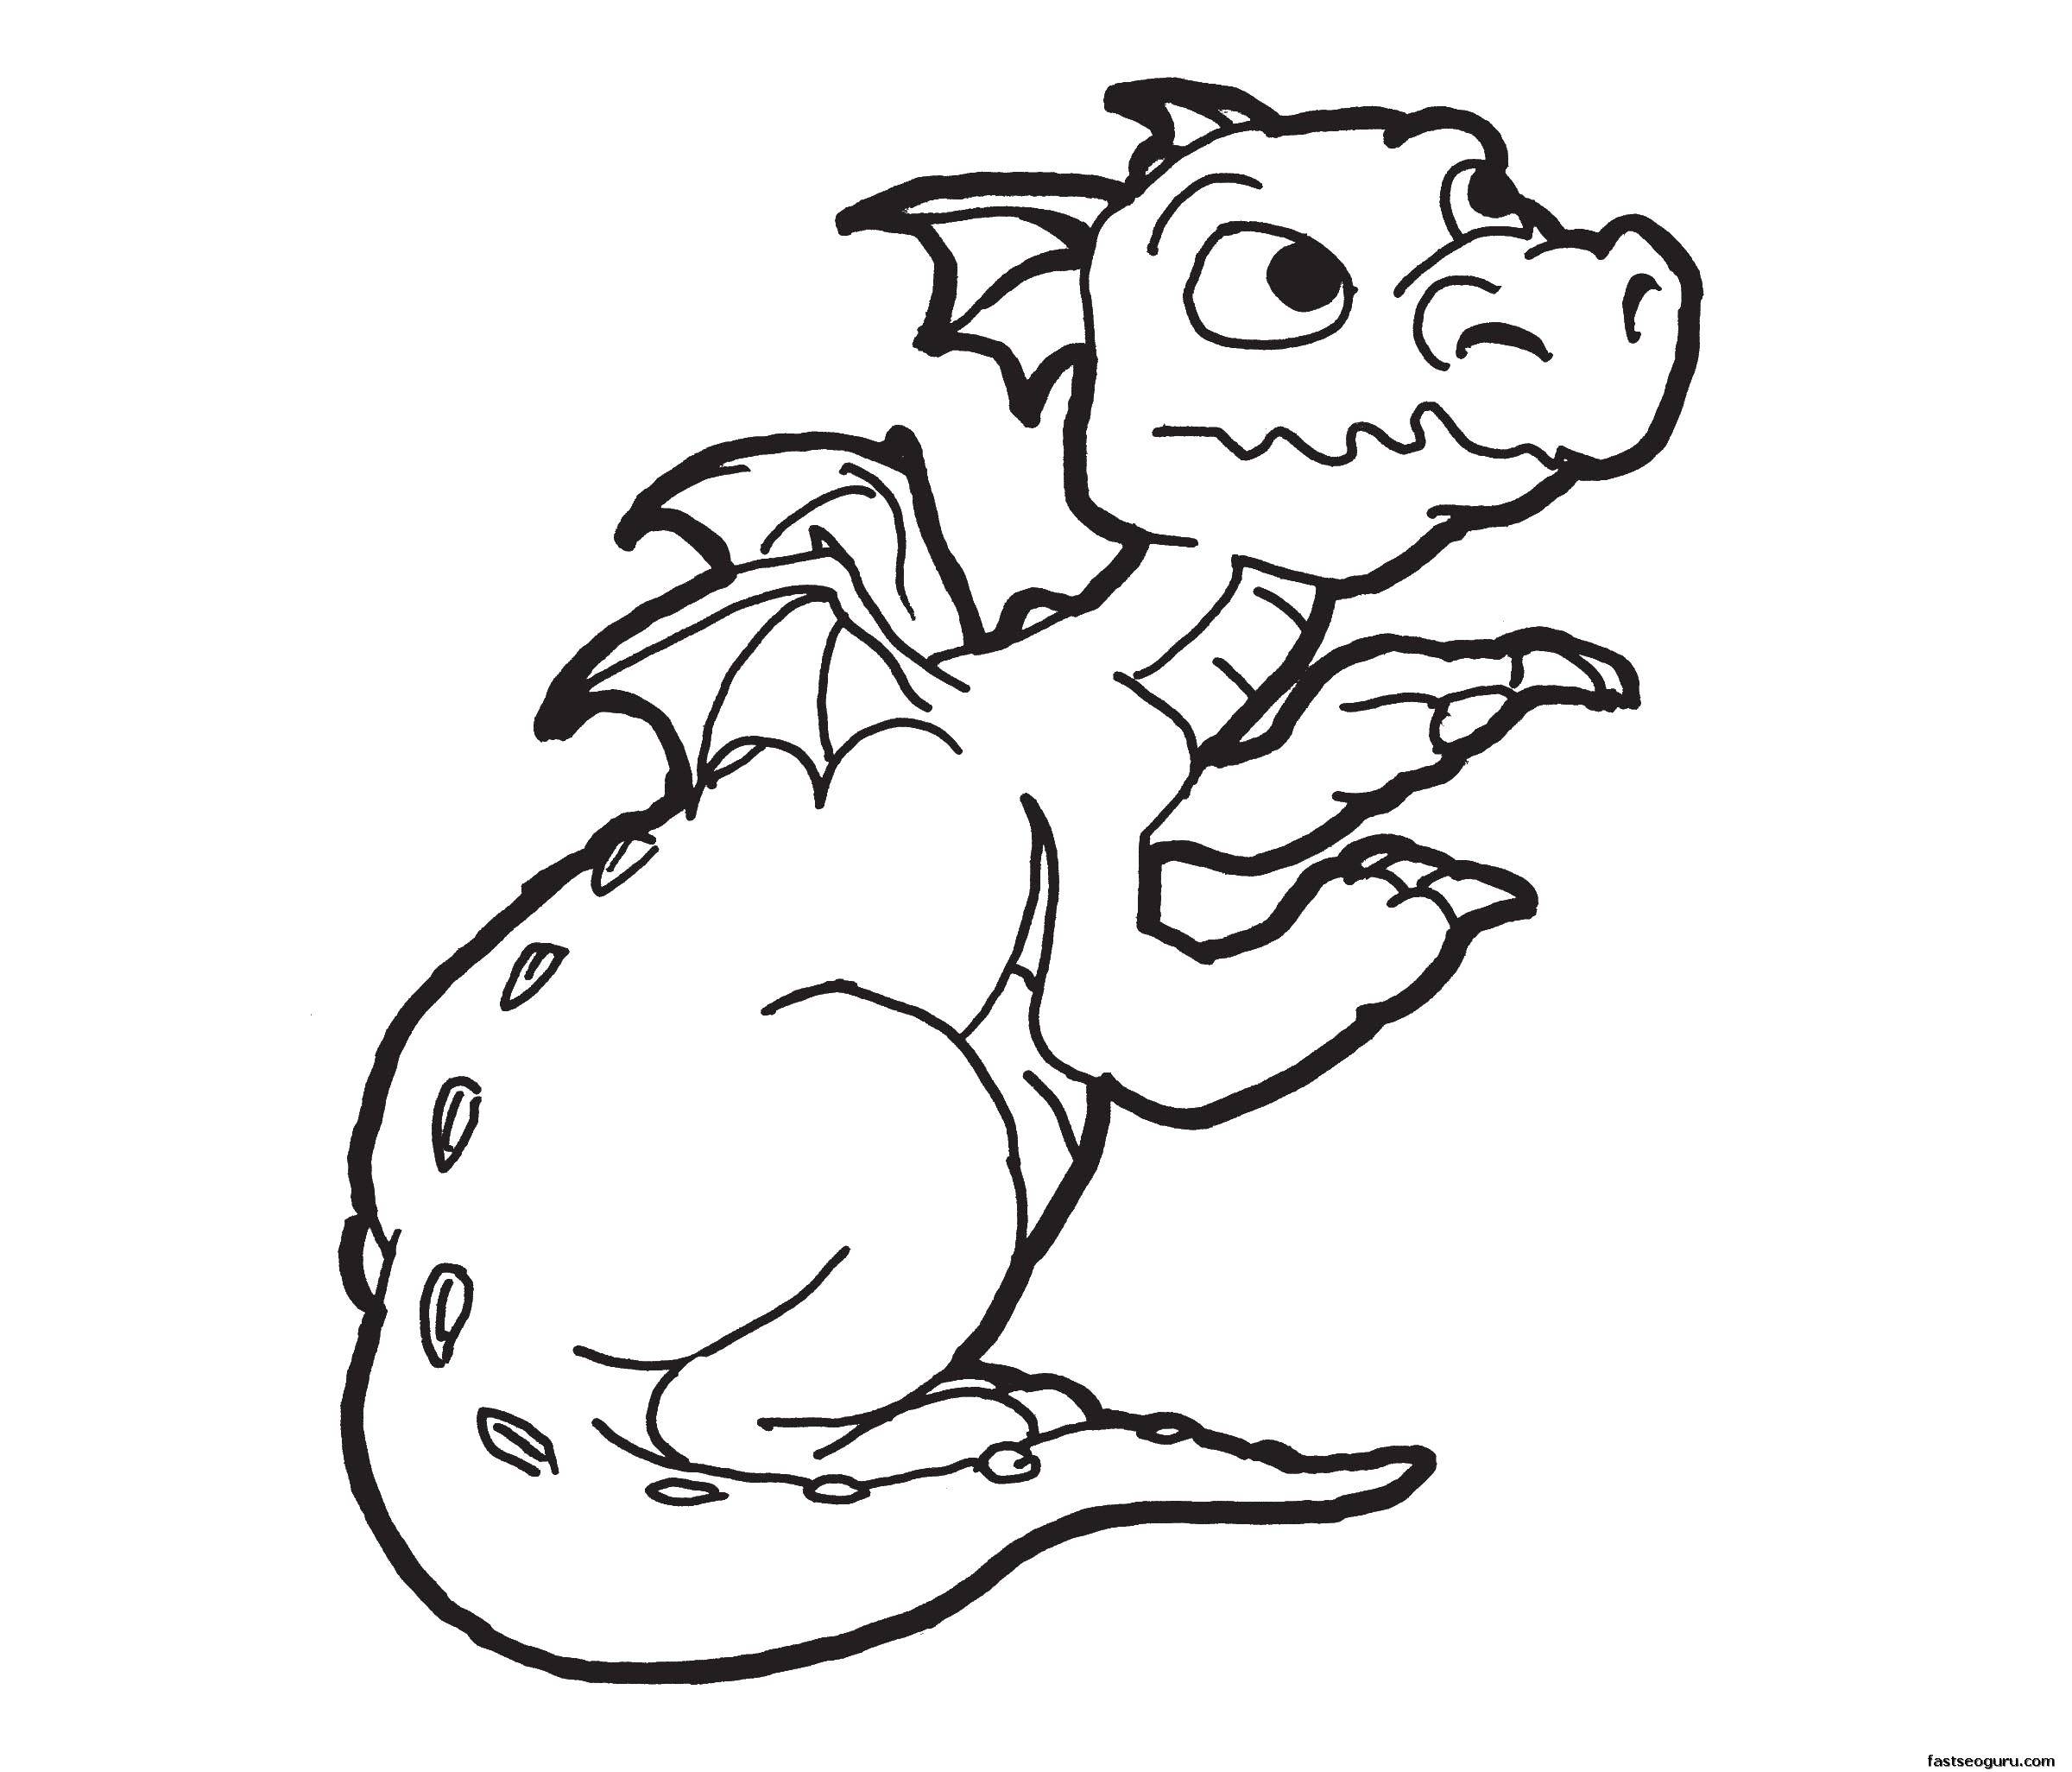 Coloring Dragon. Category For boys . Tags:  the dragon.